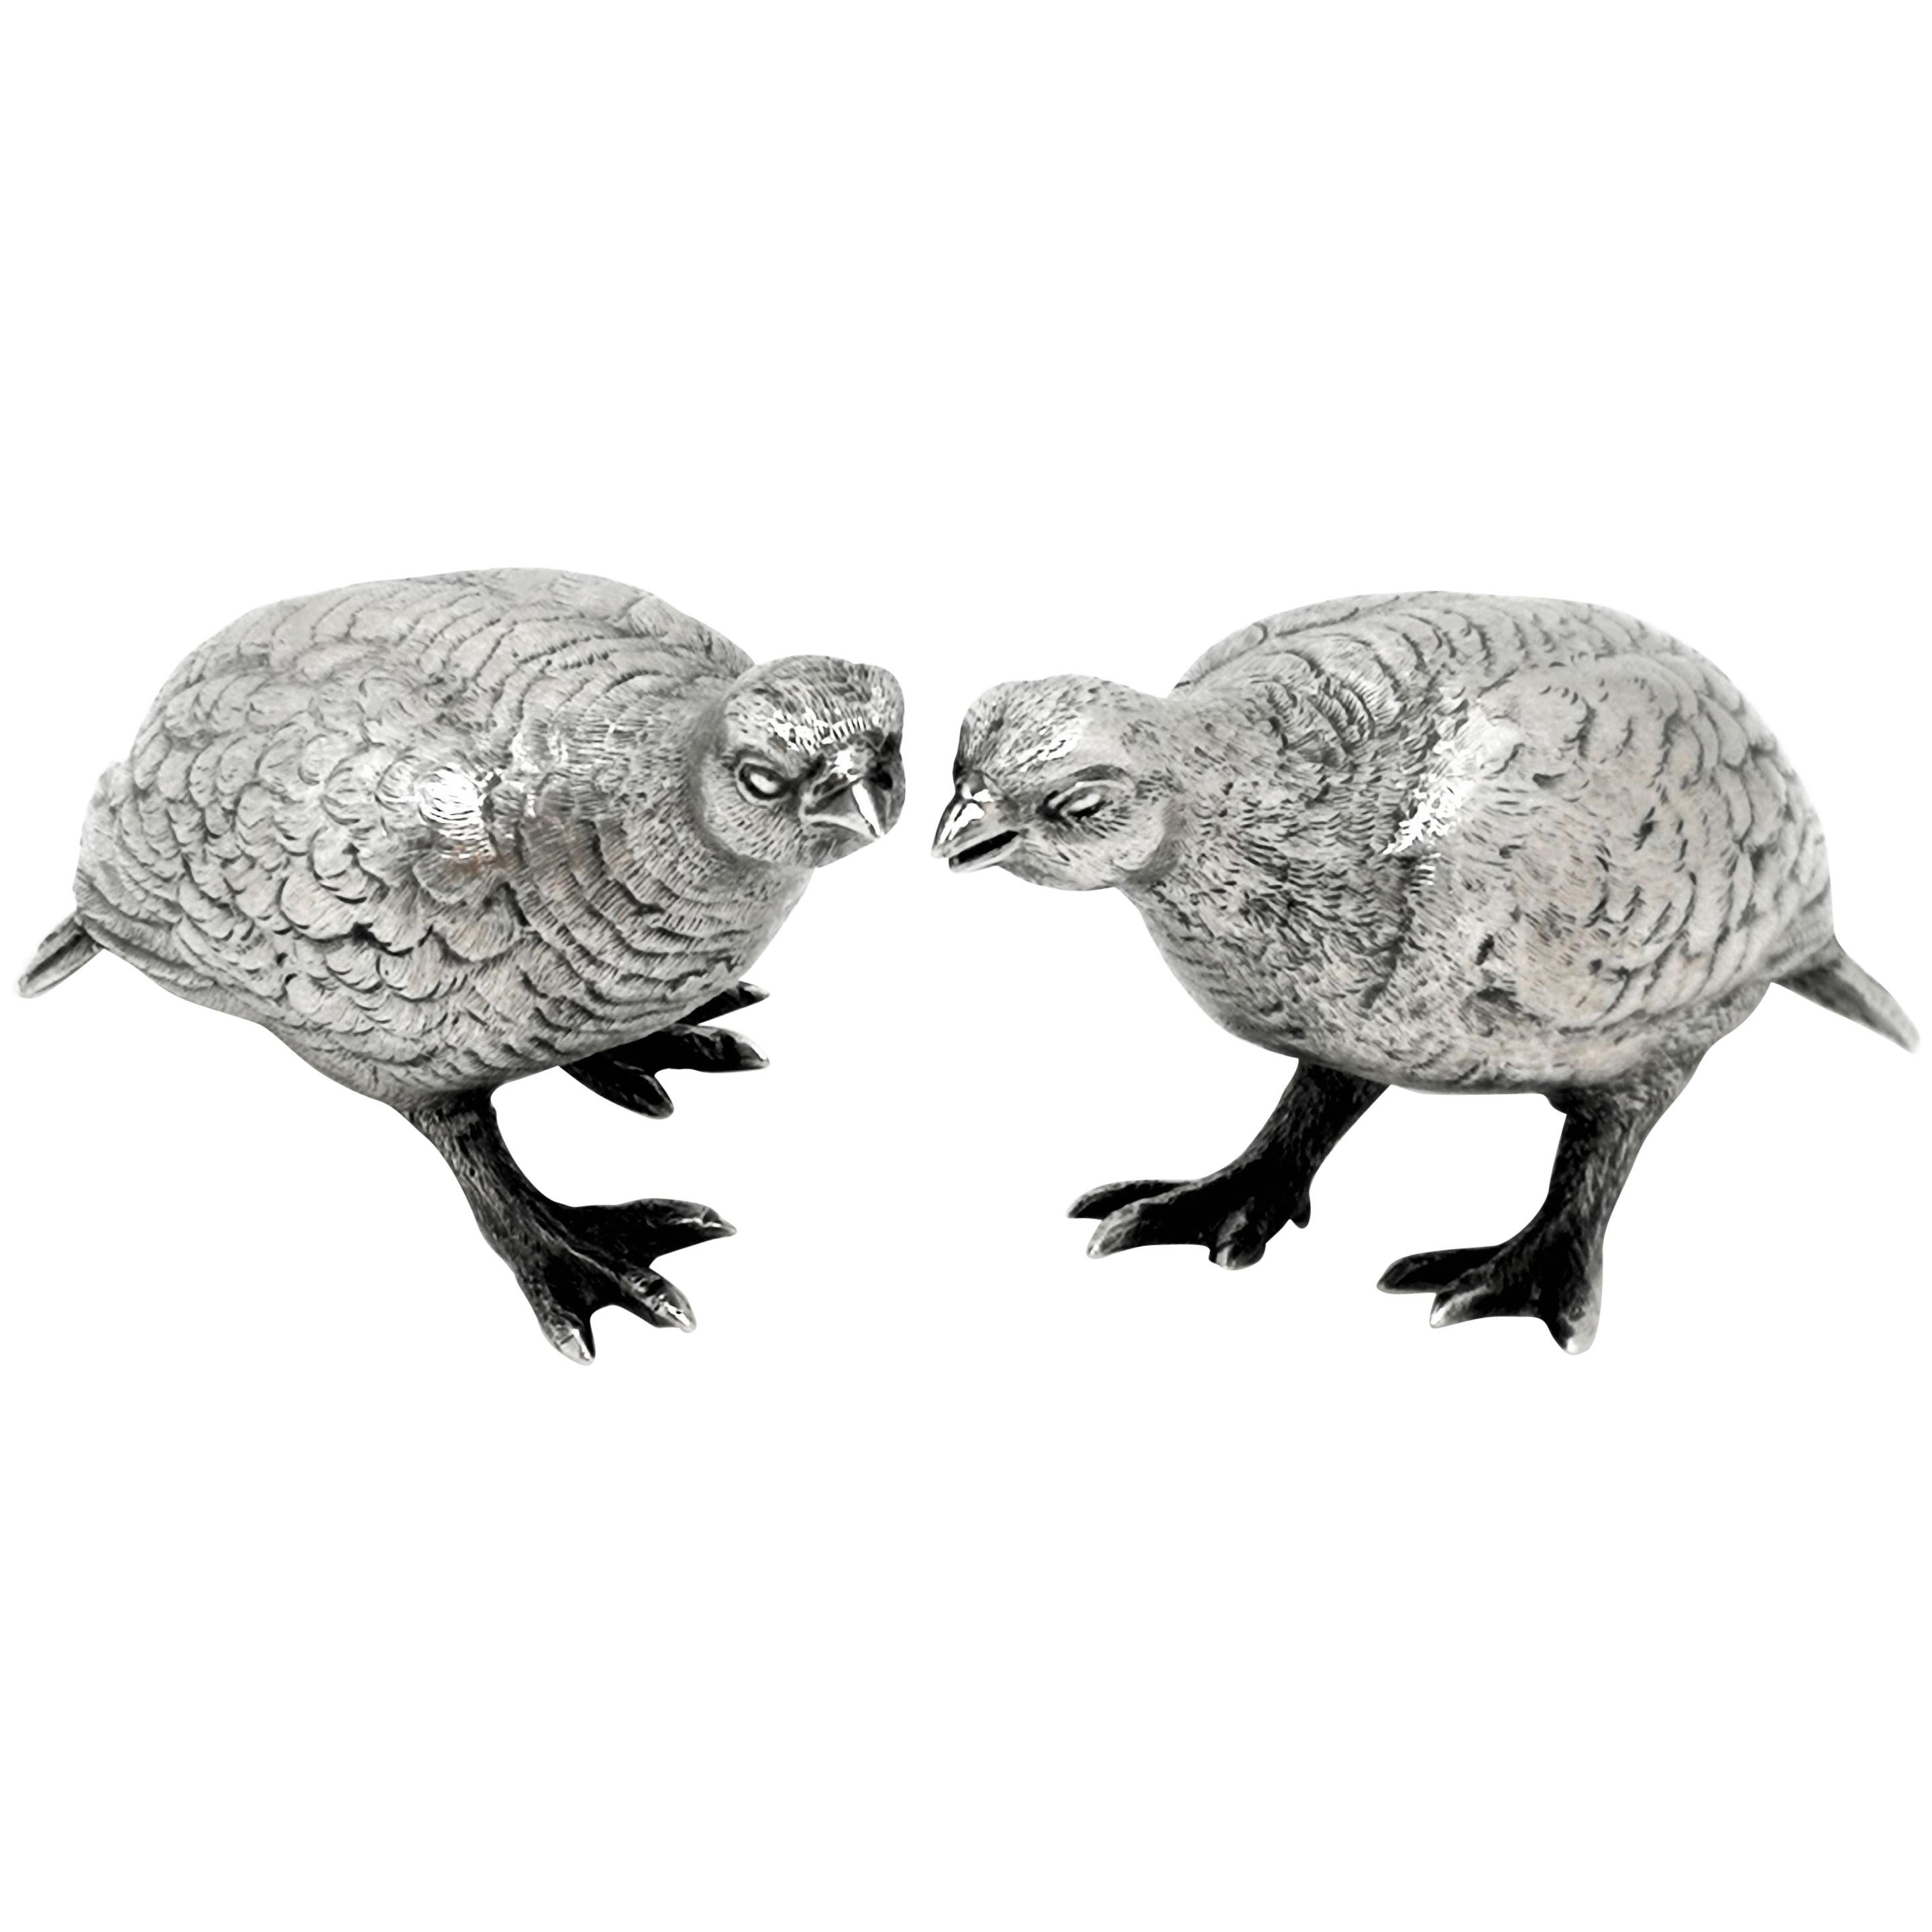 Pair of Sterling Silver Grouse Birds Model Figures 1964